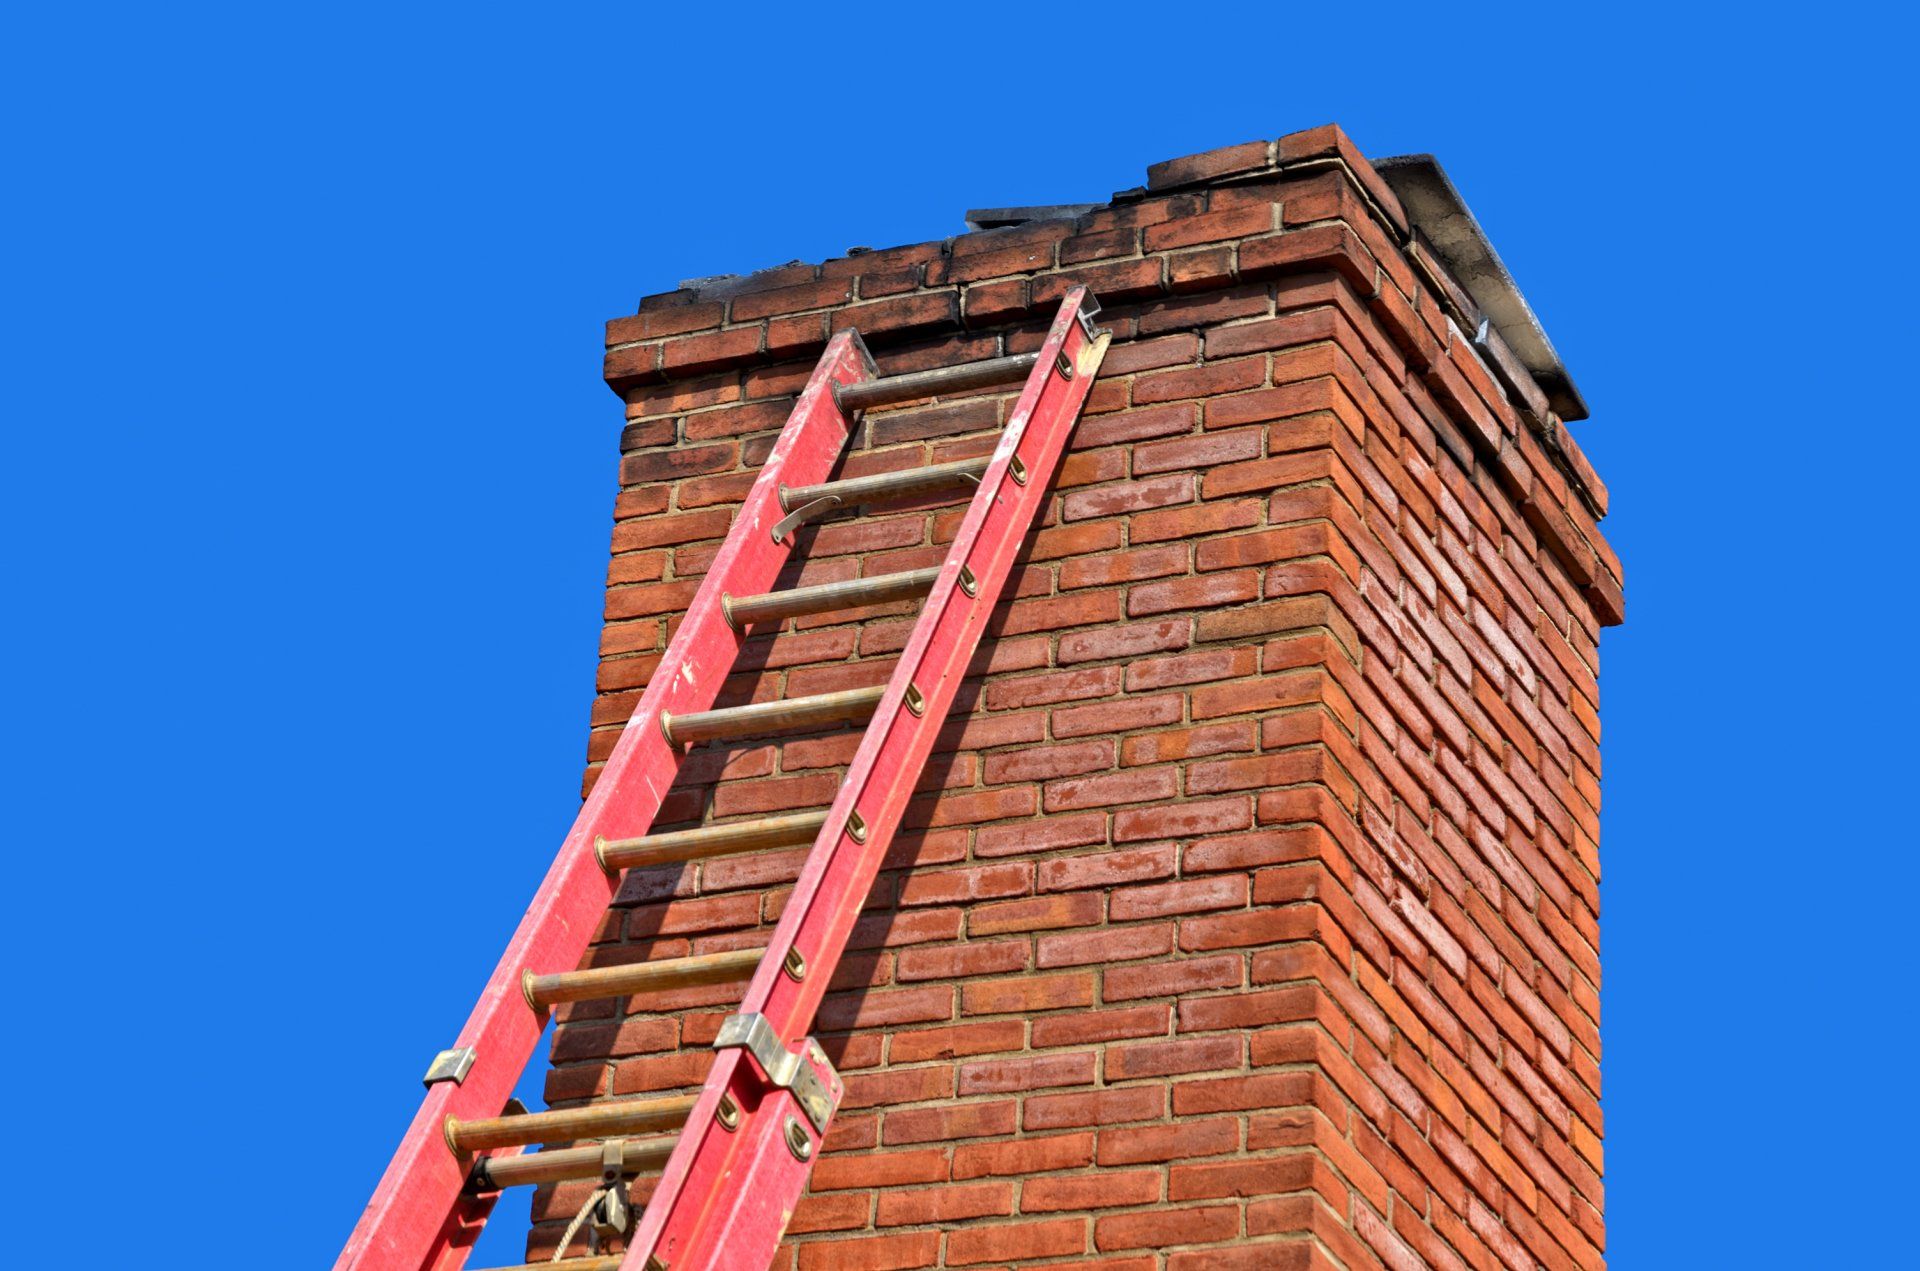 Storm Damage Repairs — A Ladder On A Chimney Made Of Bricks in Pittsburgh, PA